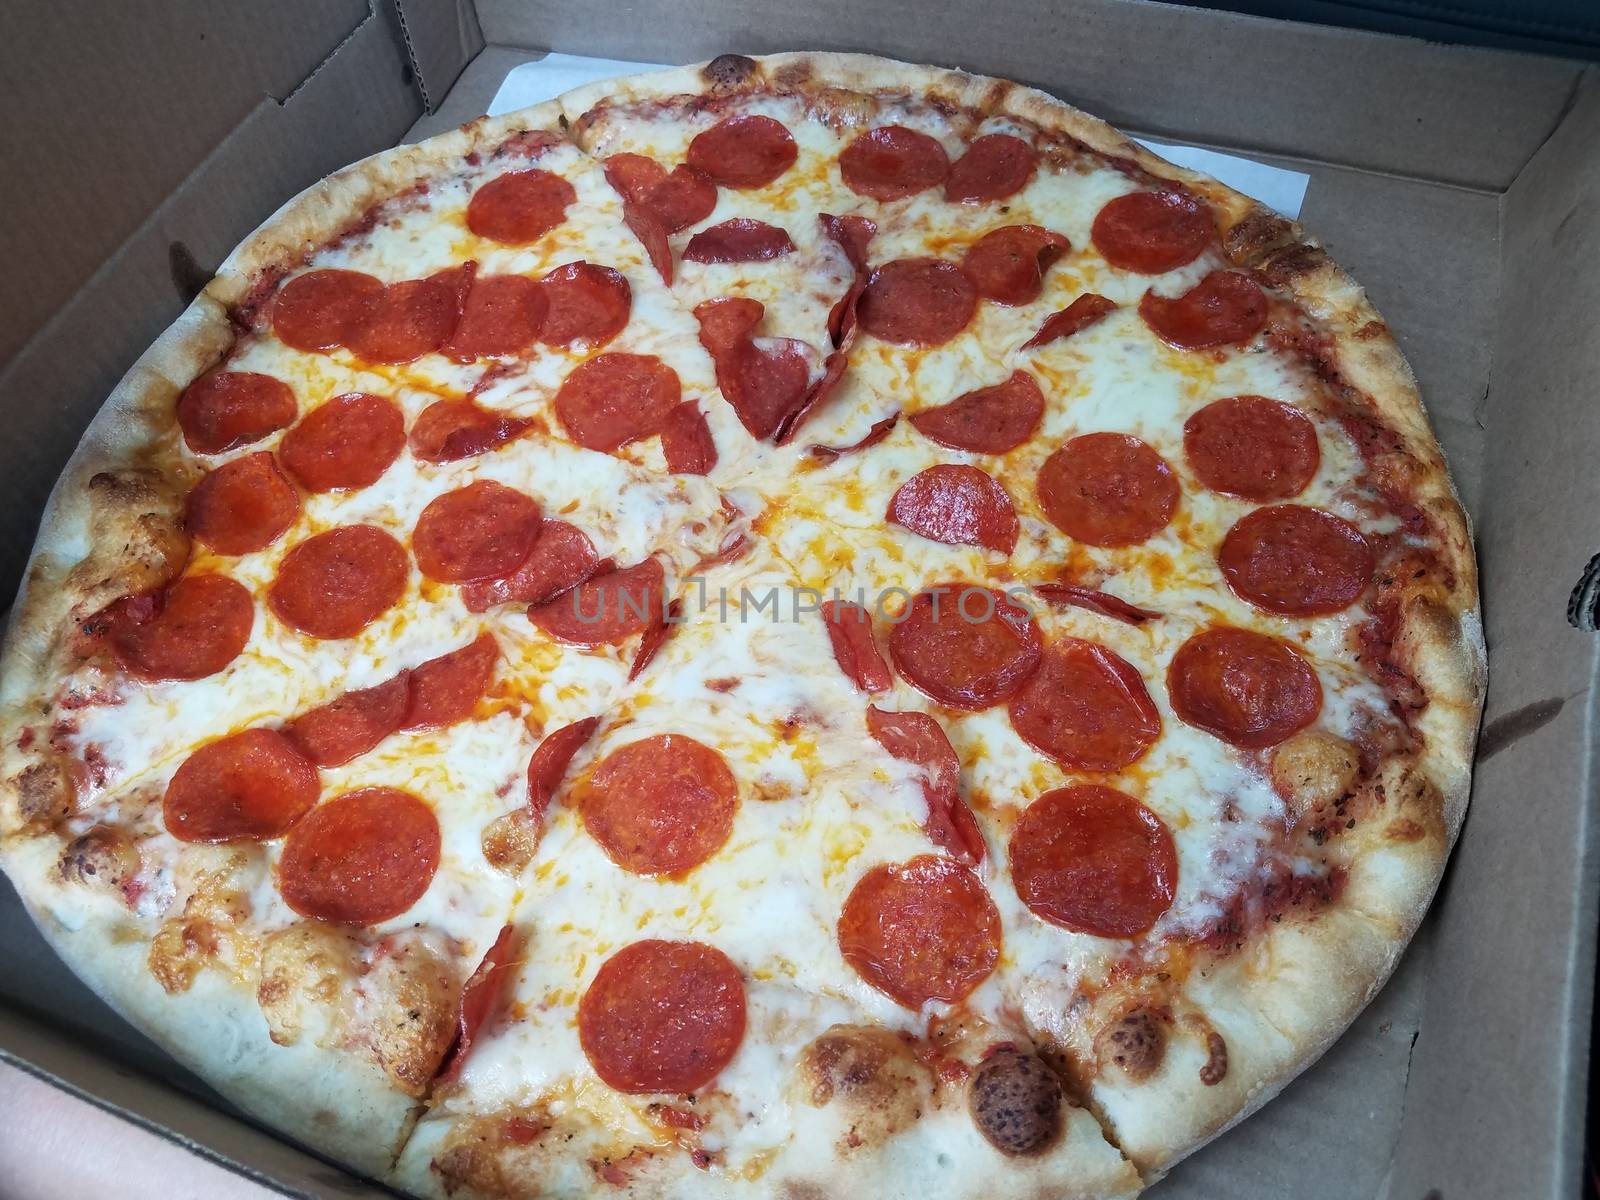 sliced pizza with pepperoni and cheese in cardboard box